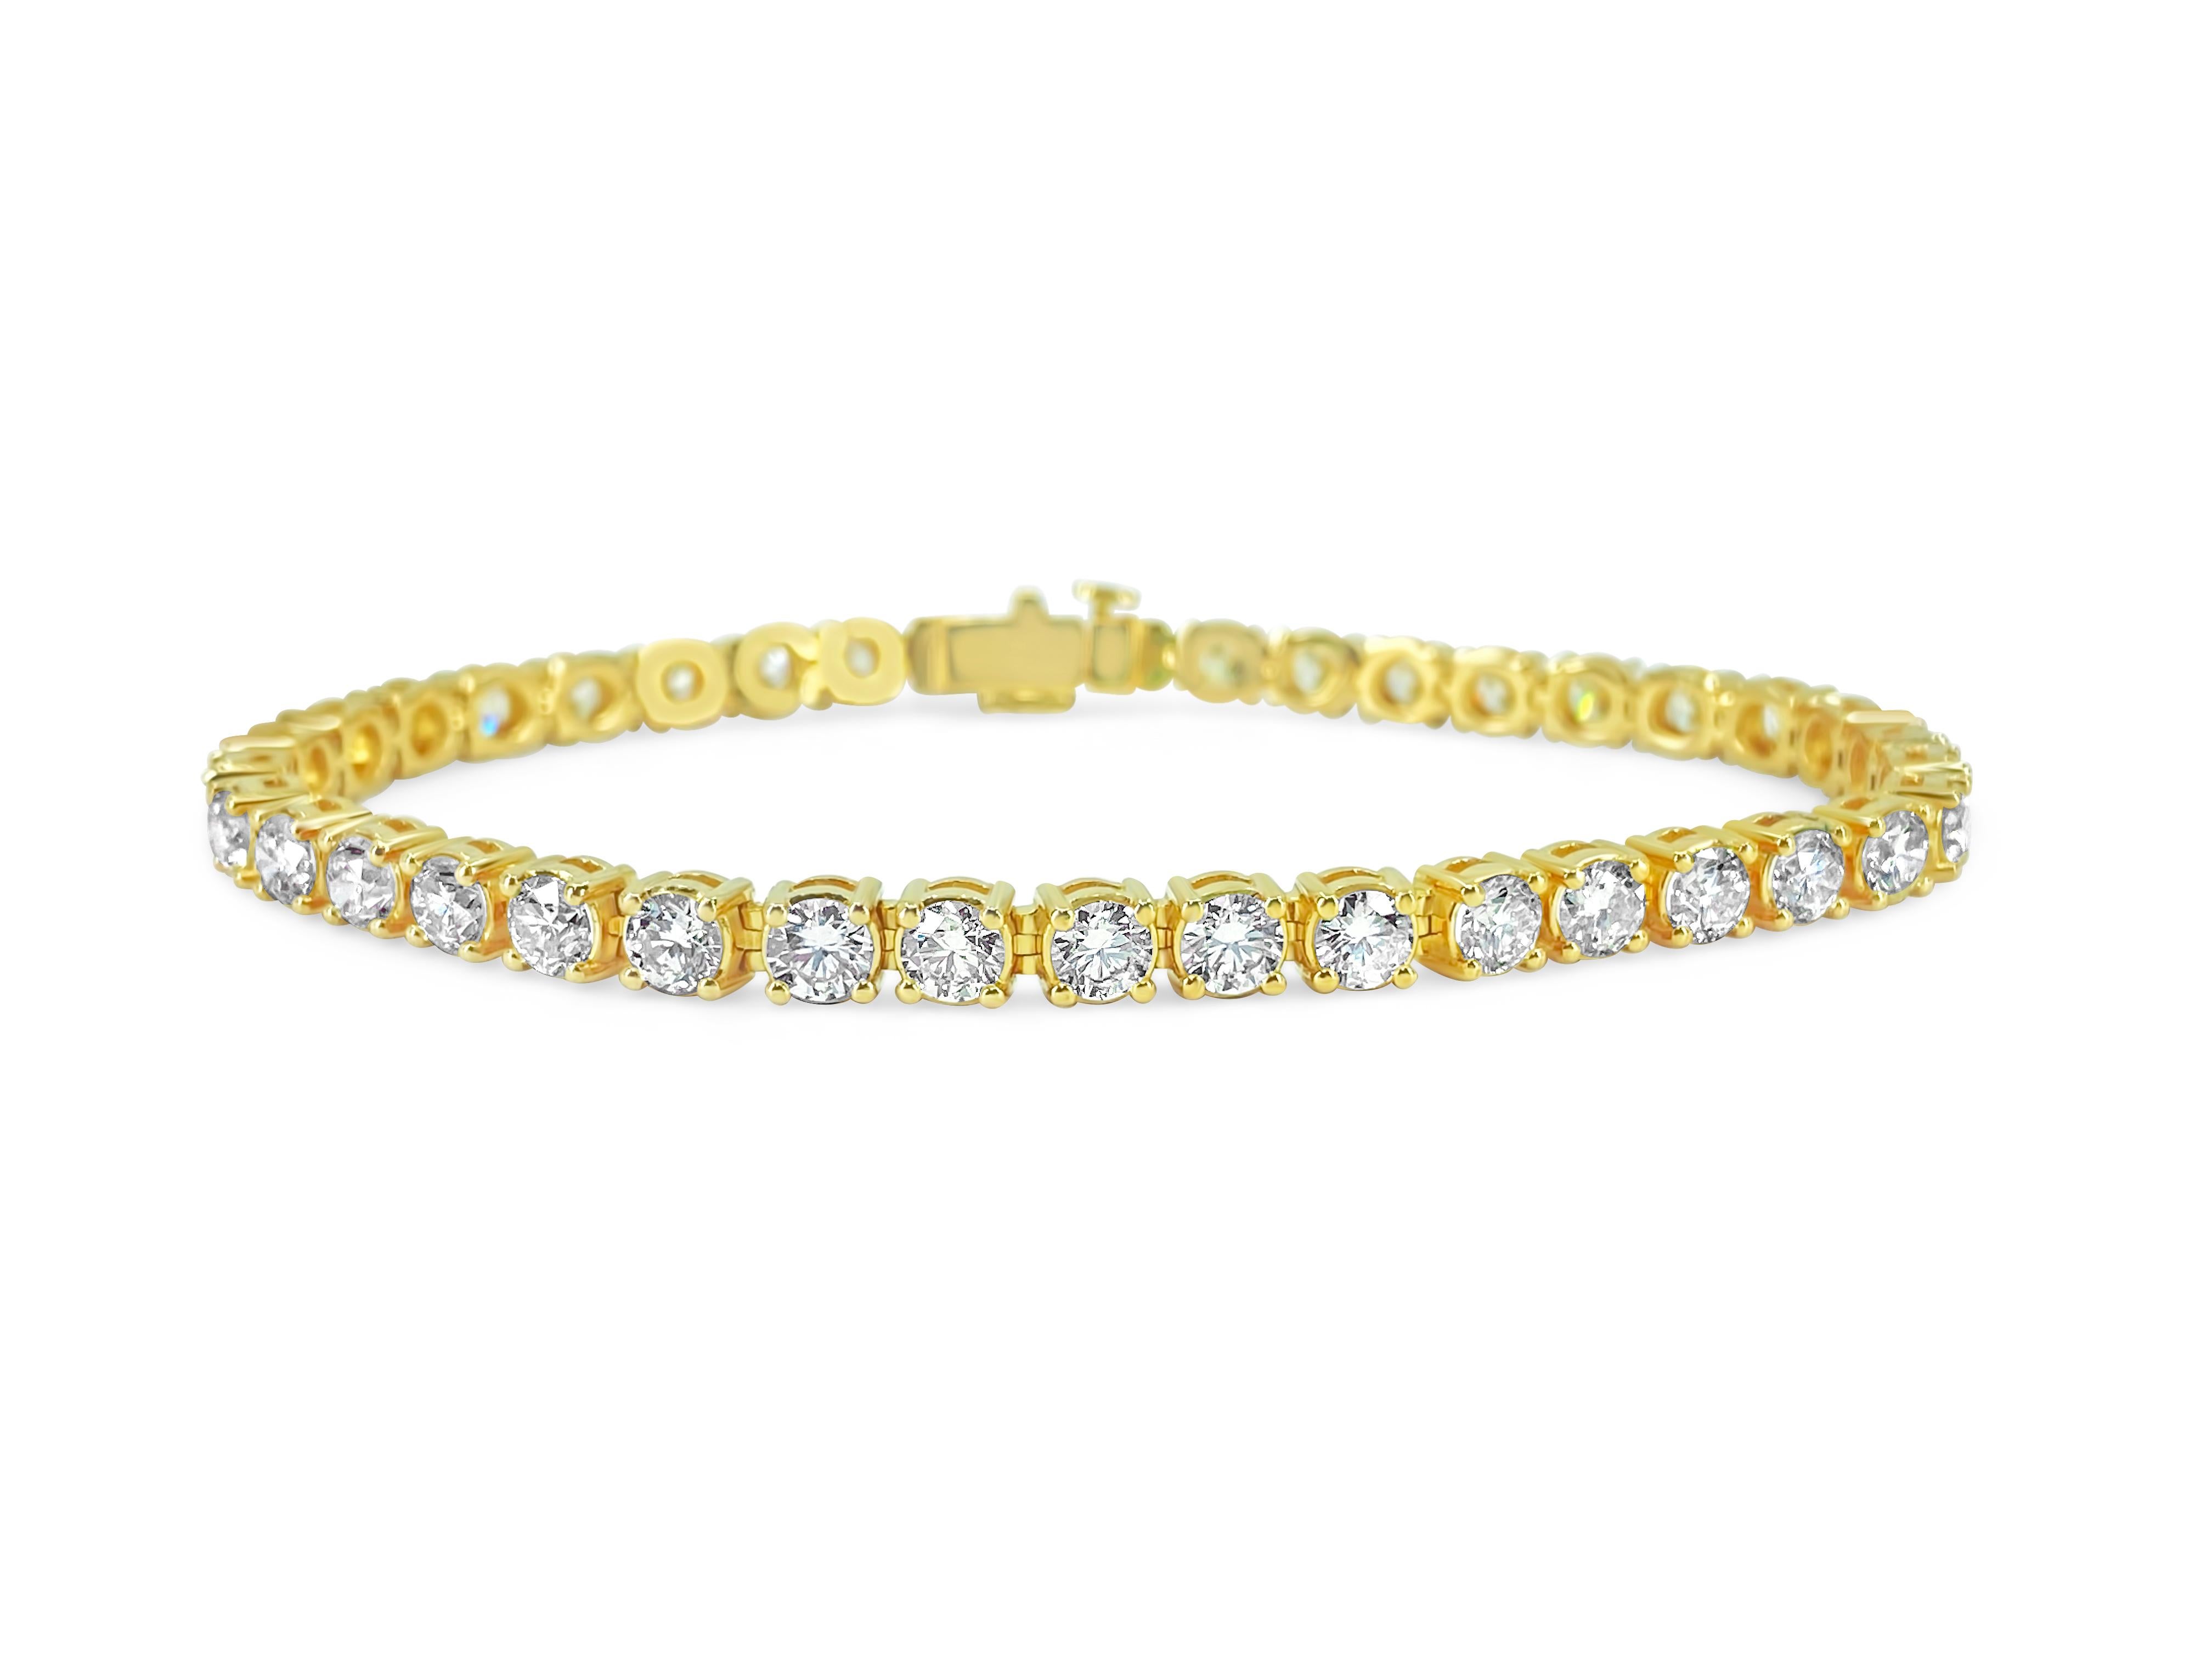 Elegance meets extravagance in this stunning 14k yellow gold diamond tennis bracelet, featuring 12.33 carats of dazzling round brilliant cut diamonds with VS clarity and G color. A masterpiece of natural earth-mined diamonds, this beautiful unisex